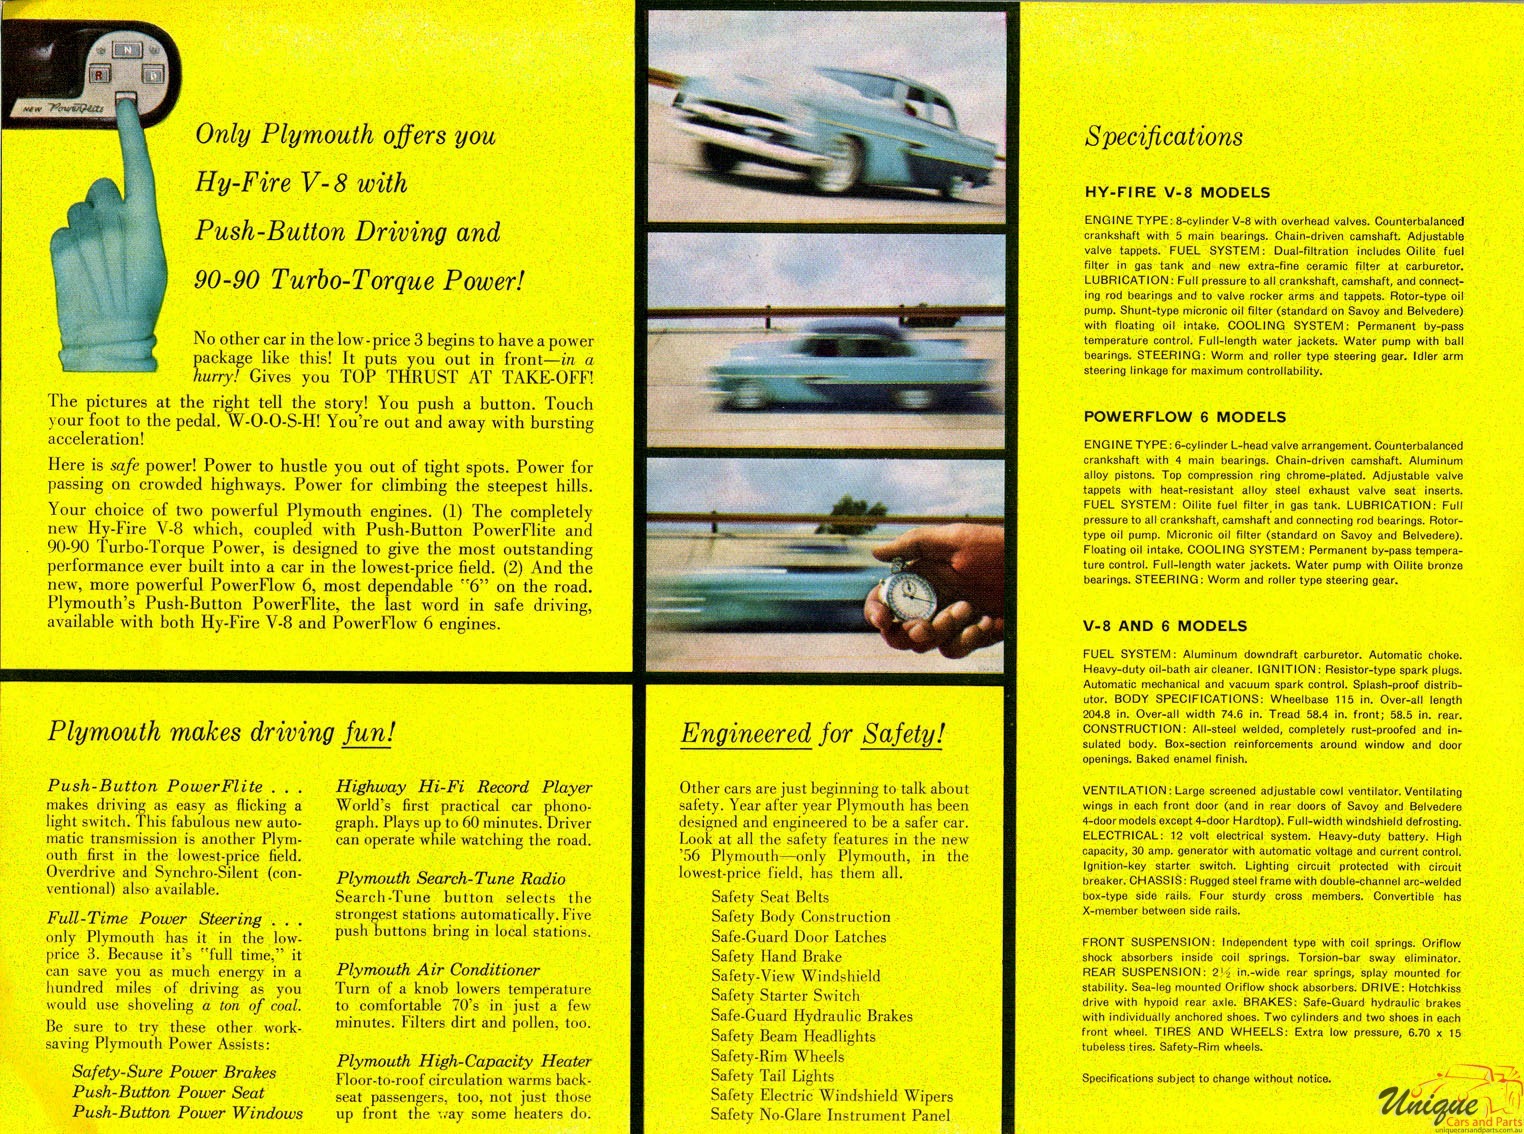 1956 Plymouth Brochure Page 4